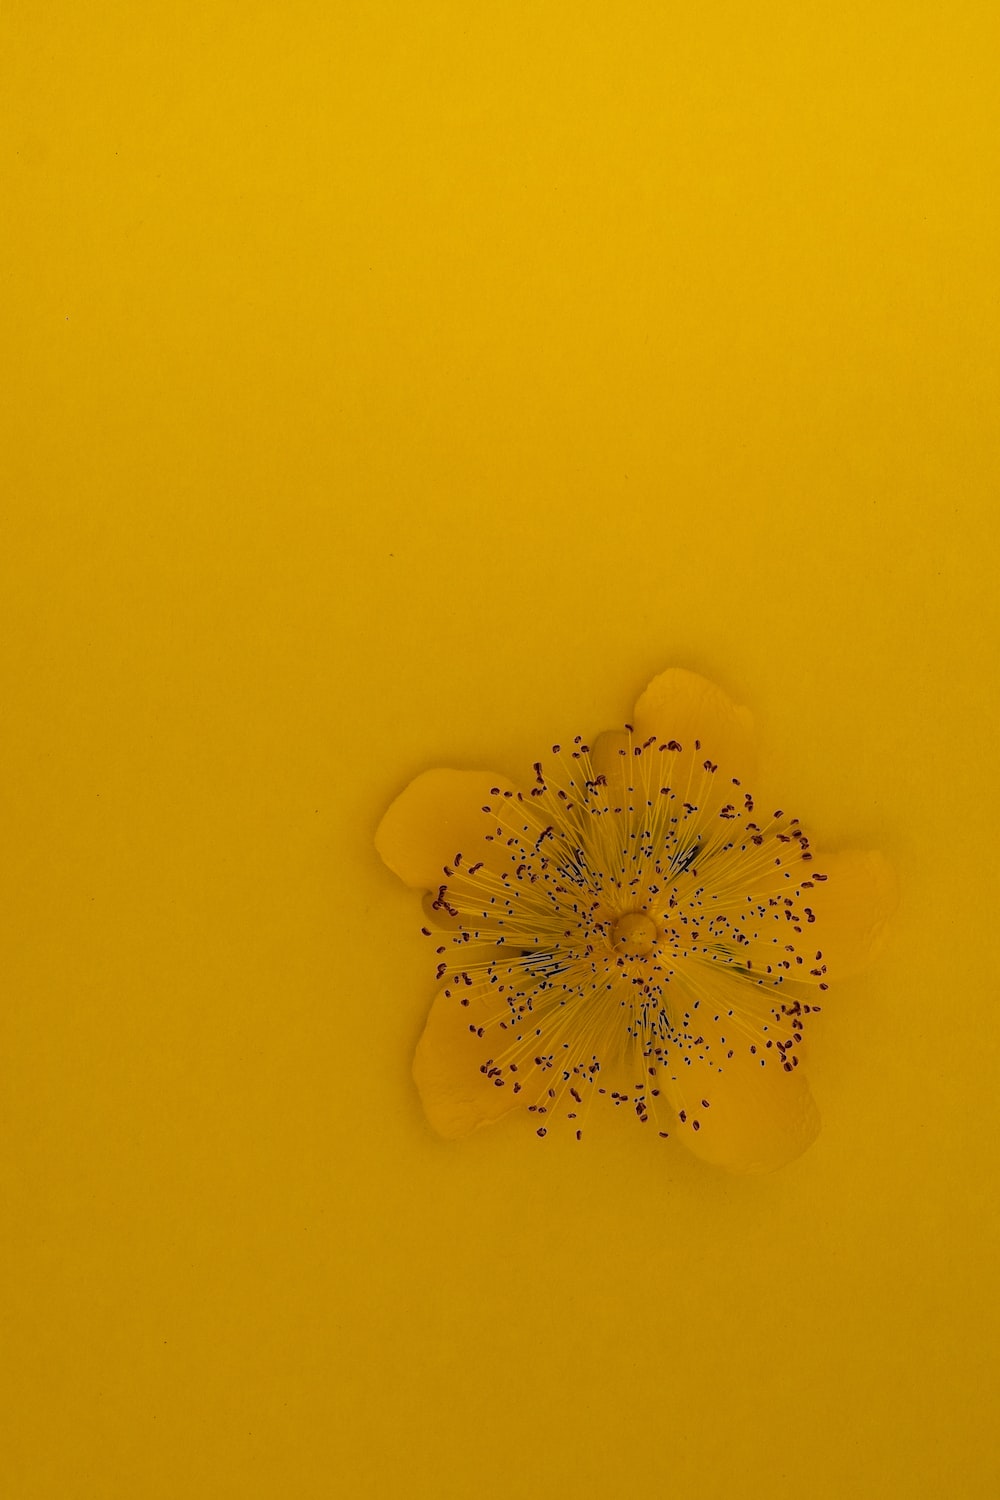 A yellow flower on a yellow background - Light yellow